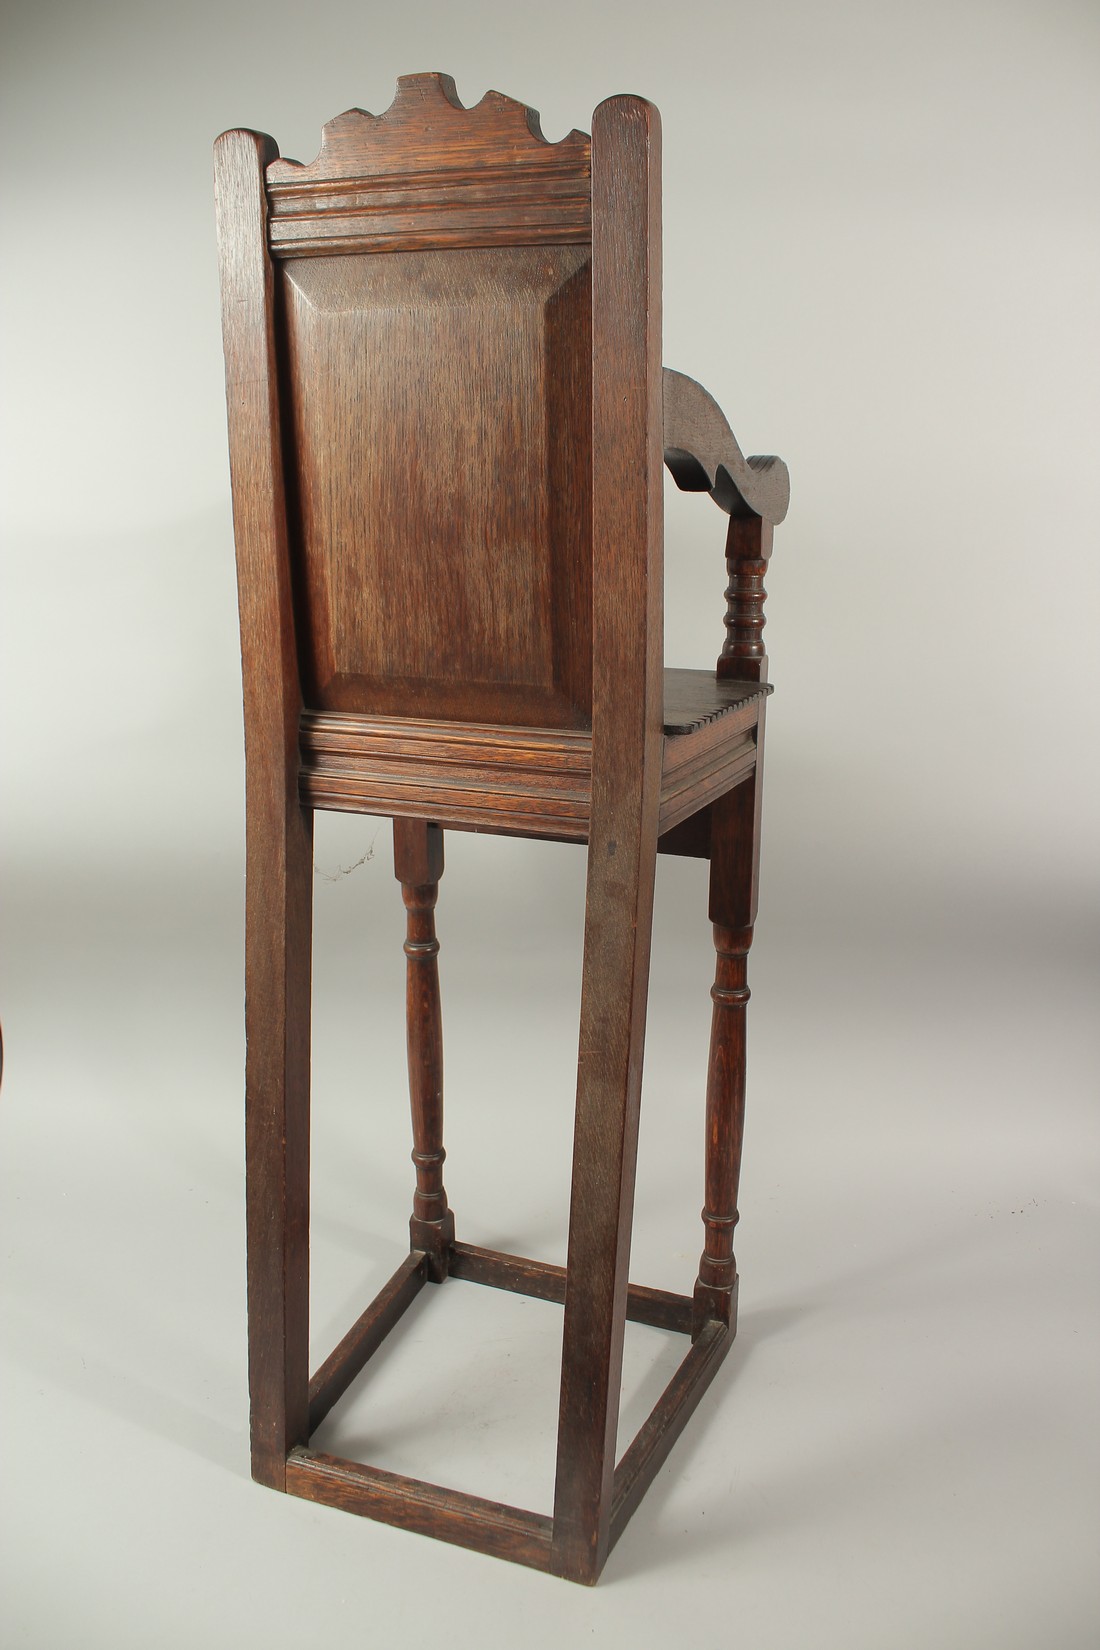 A CHILD'S 17TH CENTURY HIGH CHAIR, dated 1659, with carved back and solid seat. 3ft 6ins high x - Image 4 of 4